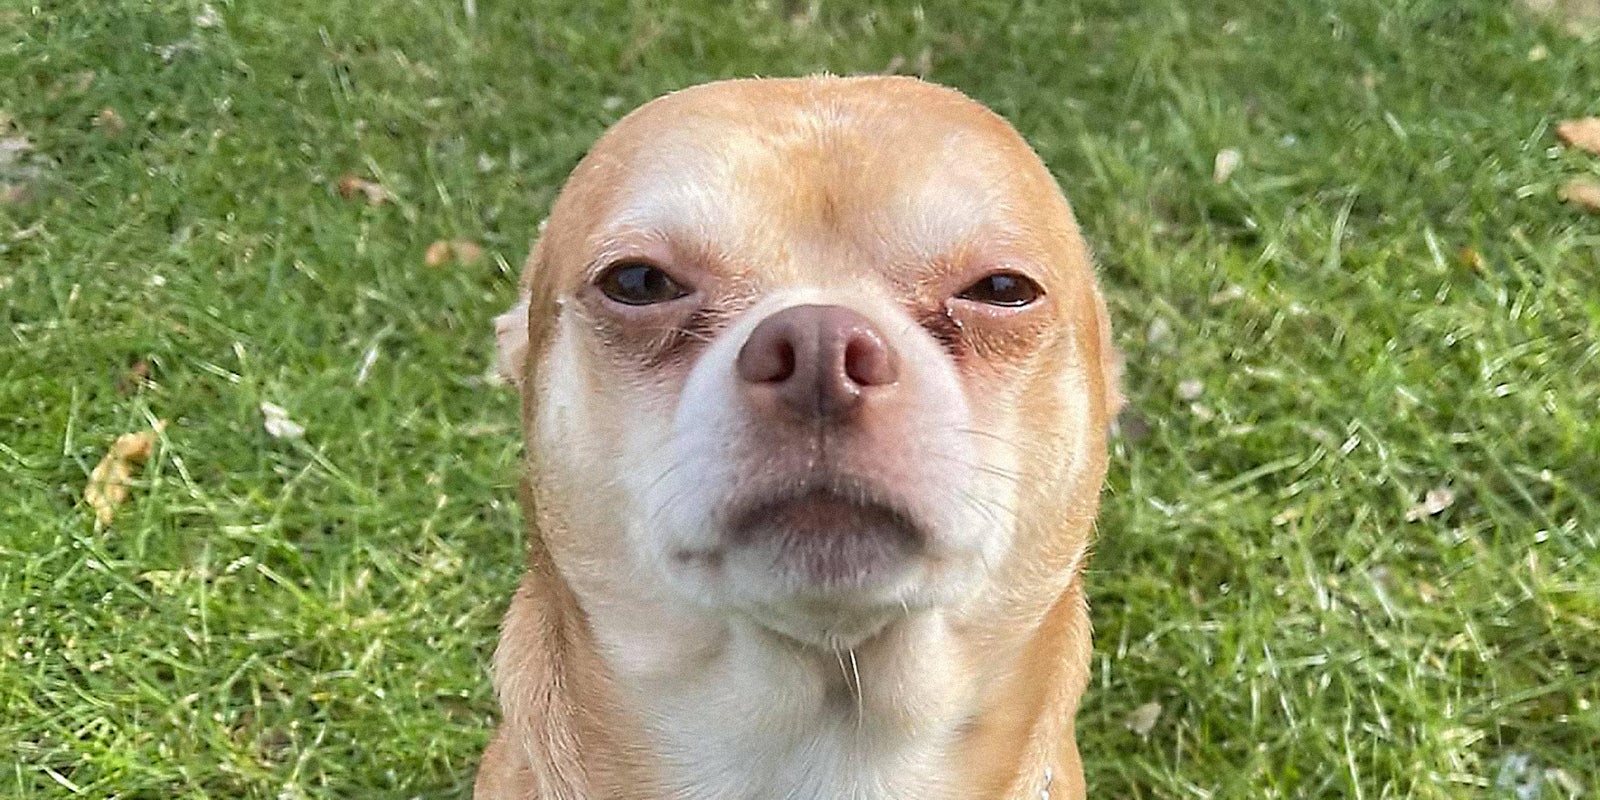 A chihuahua staring at the camera with ears back.